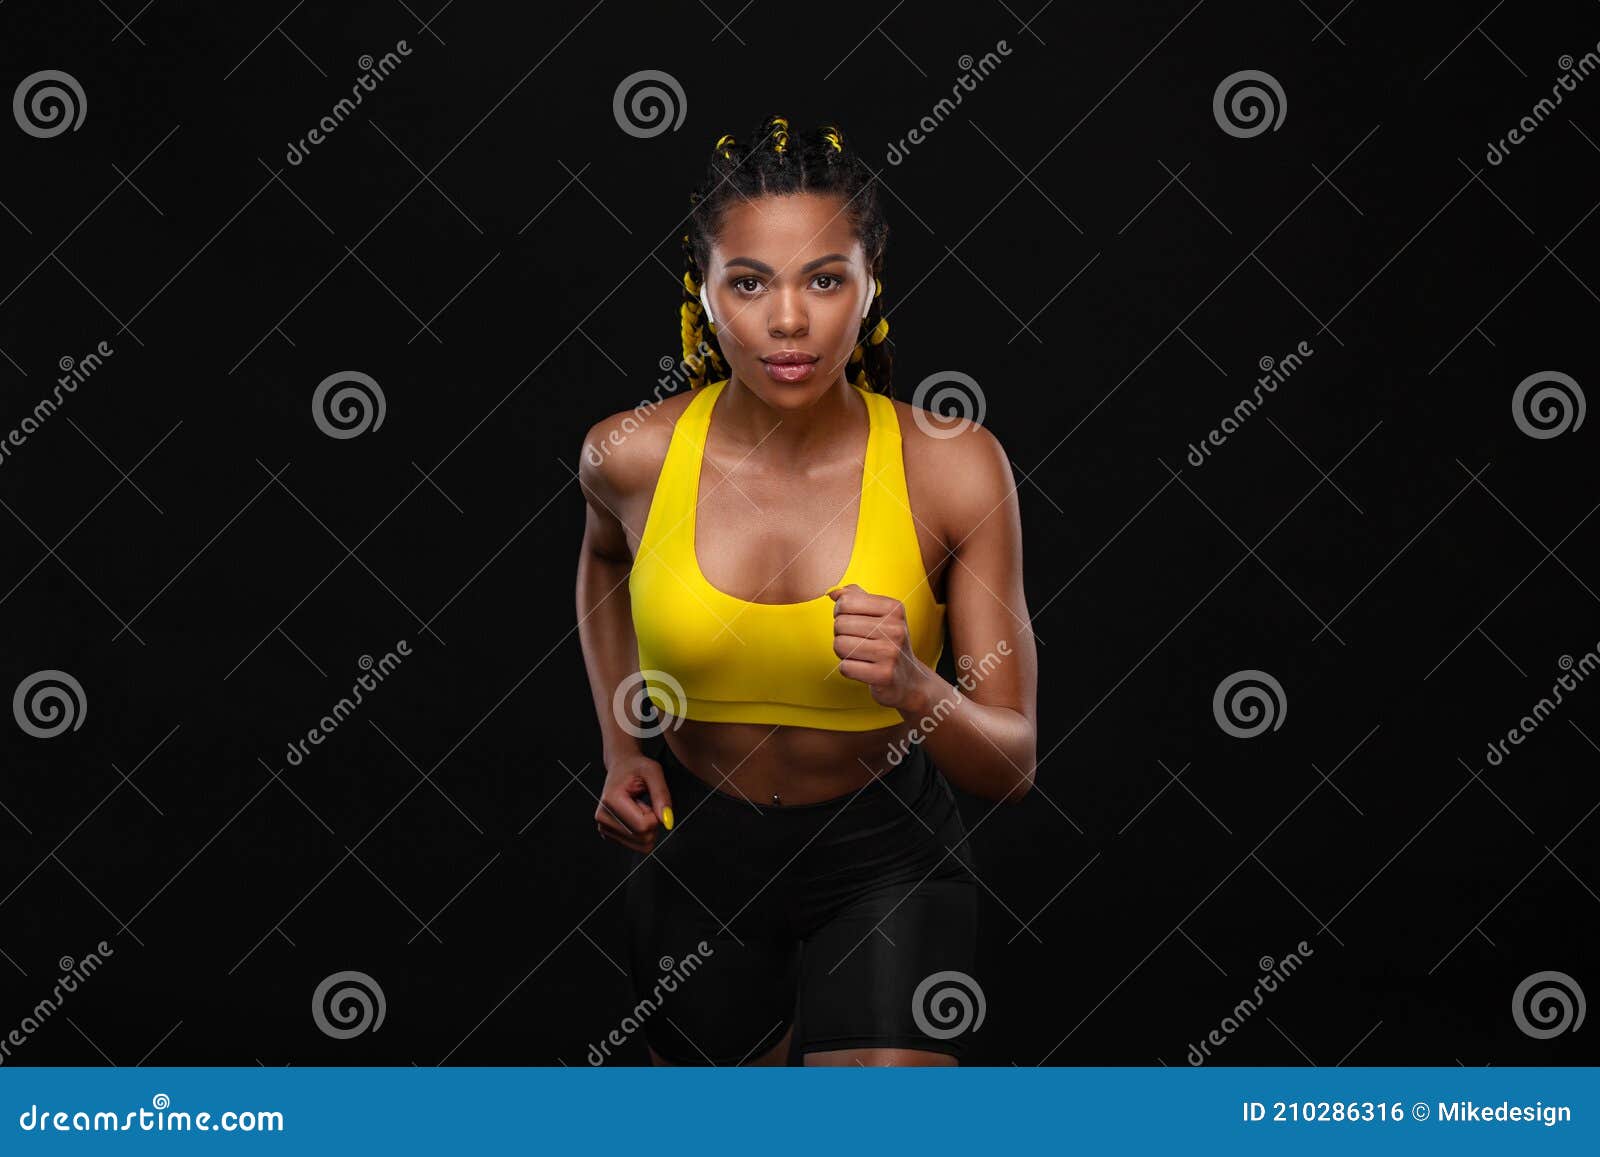 Sprinter Run. Strong Athletic Woman Running on Black Background